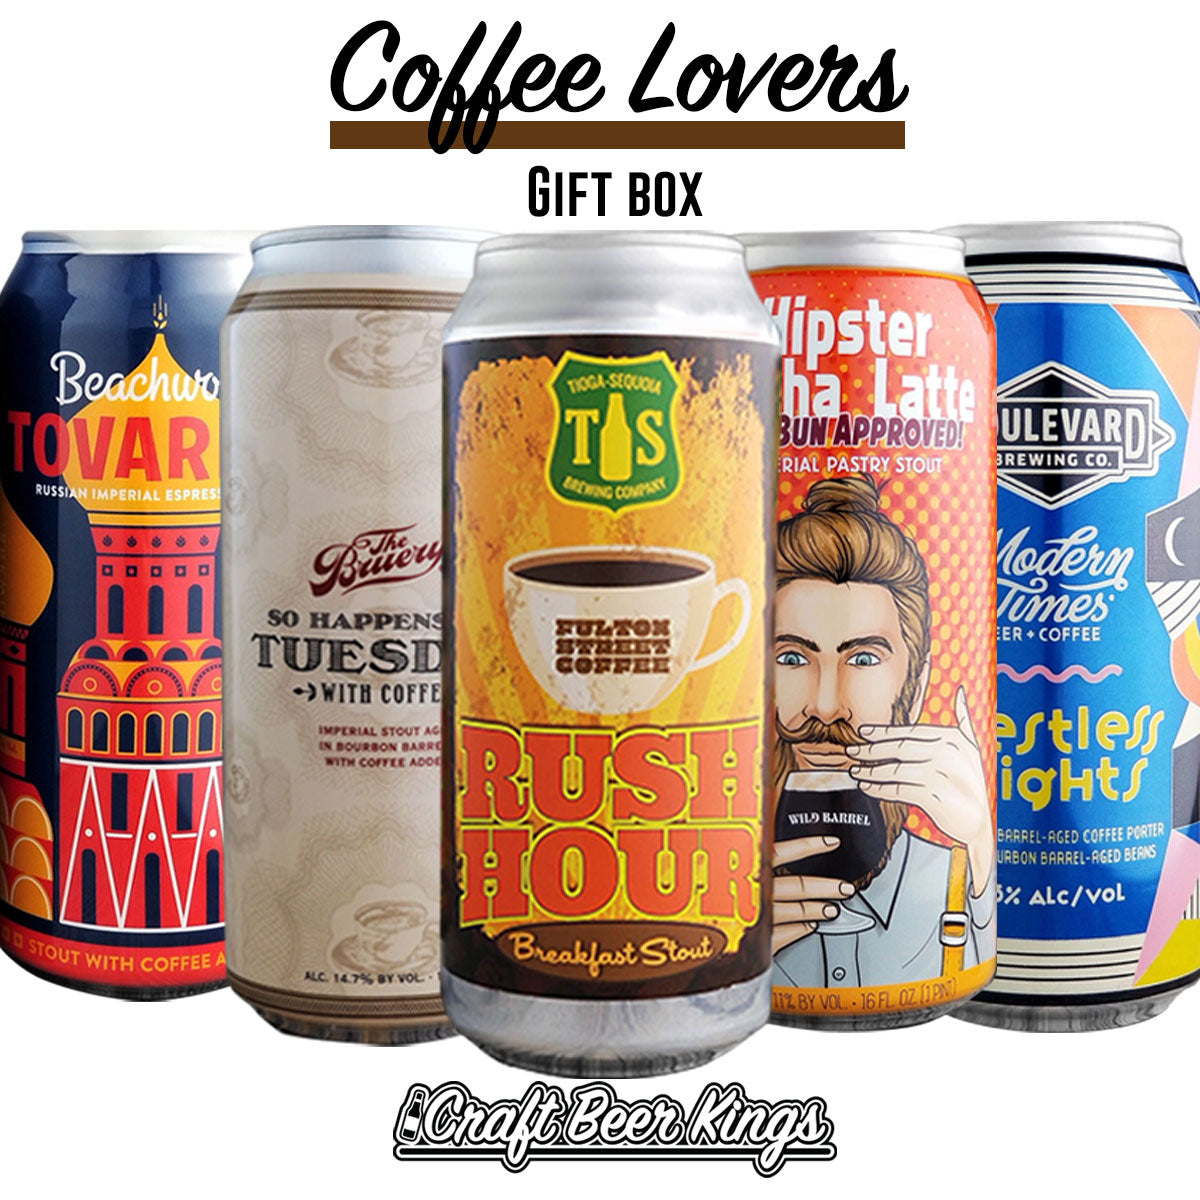 Coffee Lovers Gift Box - Free shipping!